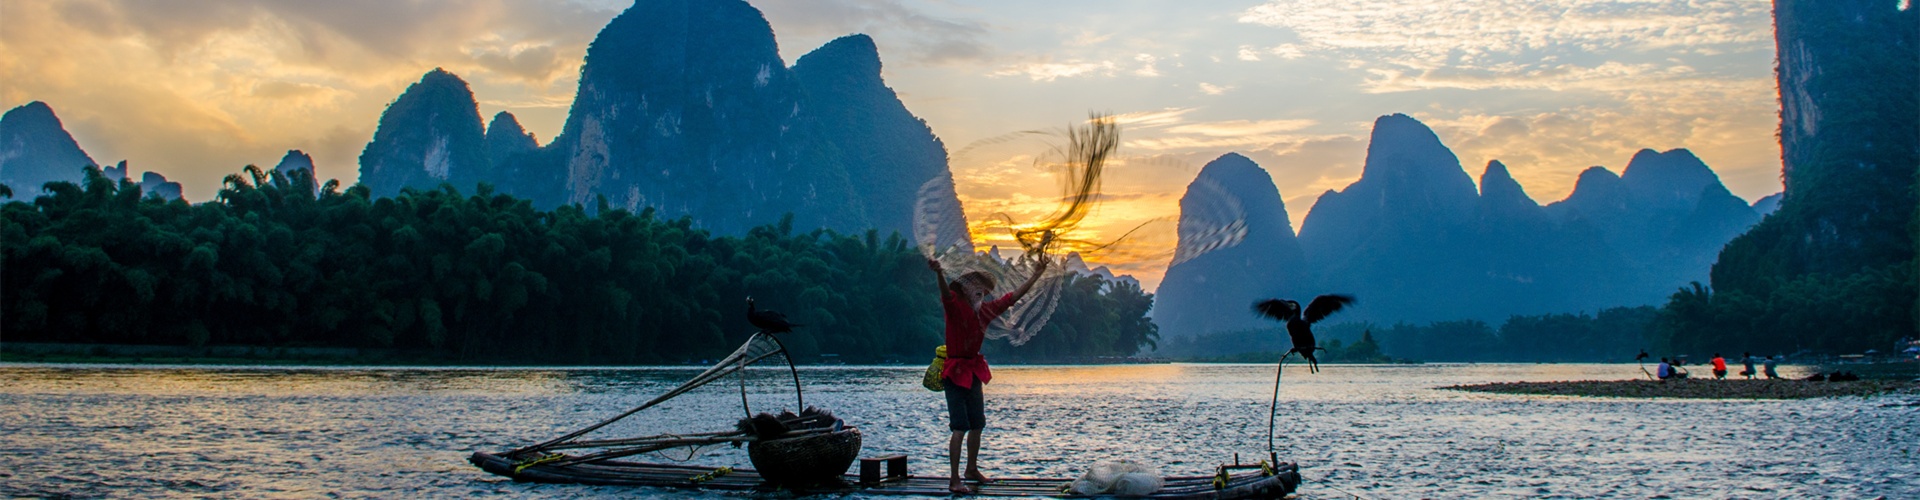 How to Visit the Li River - 3 Recommended Ways